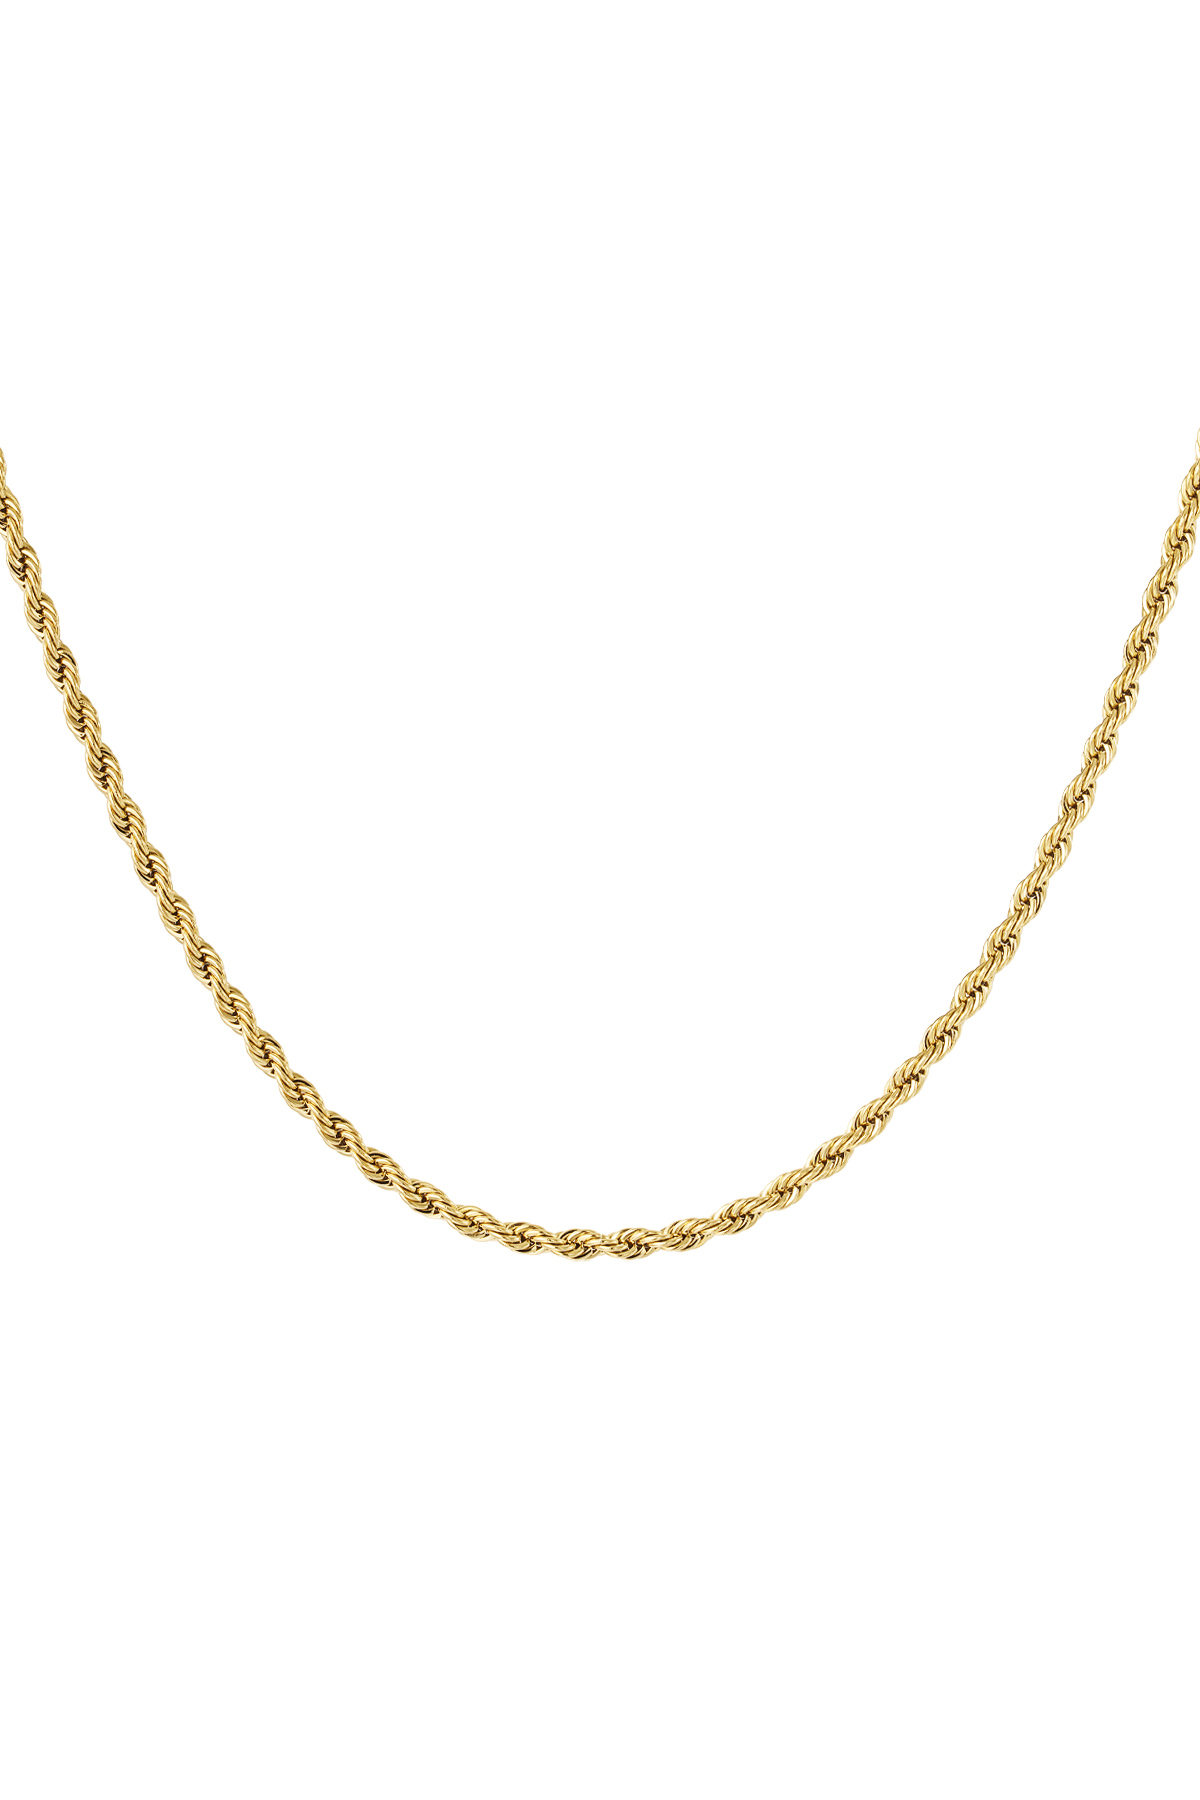 Unisex necklace twisted 50cm - gold-4.0MM h5 